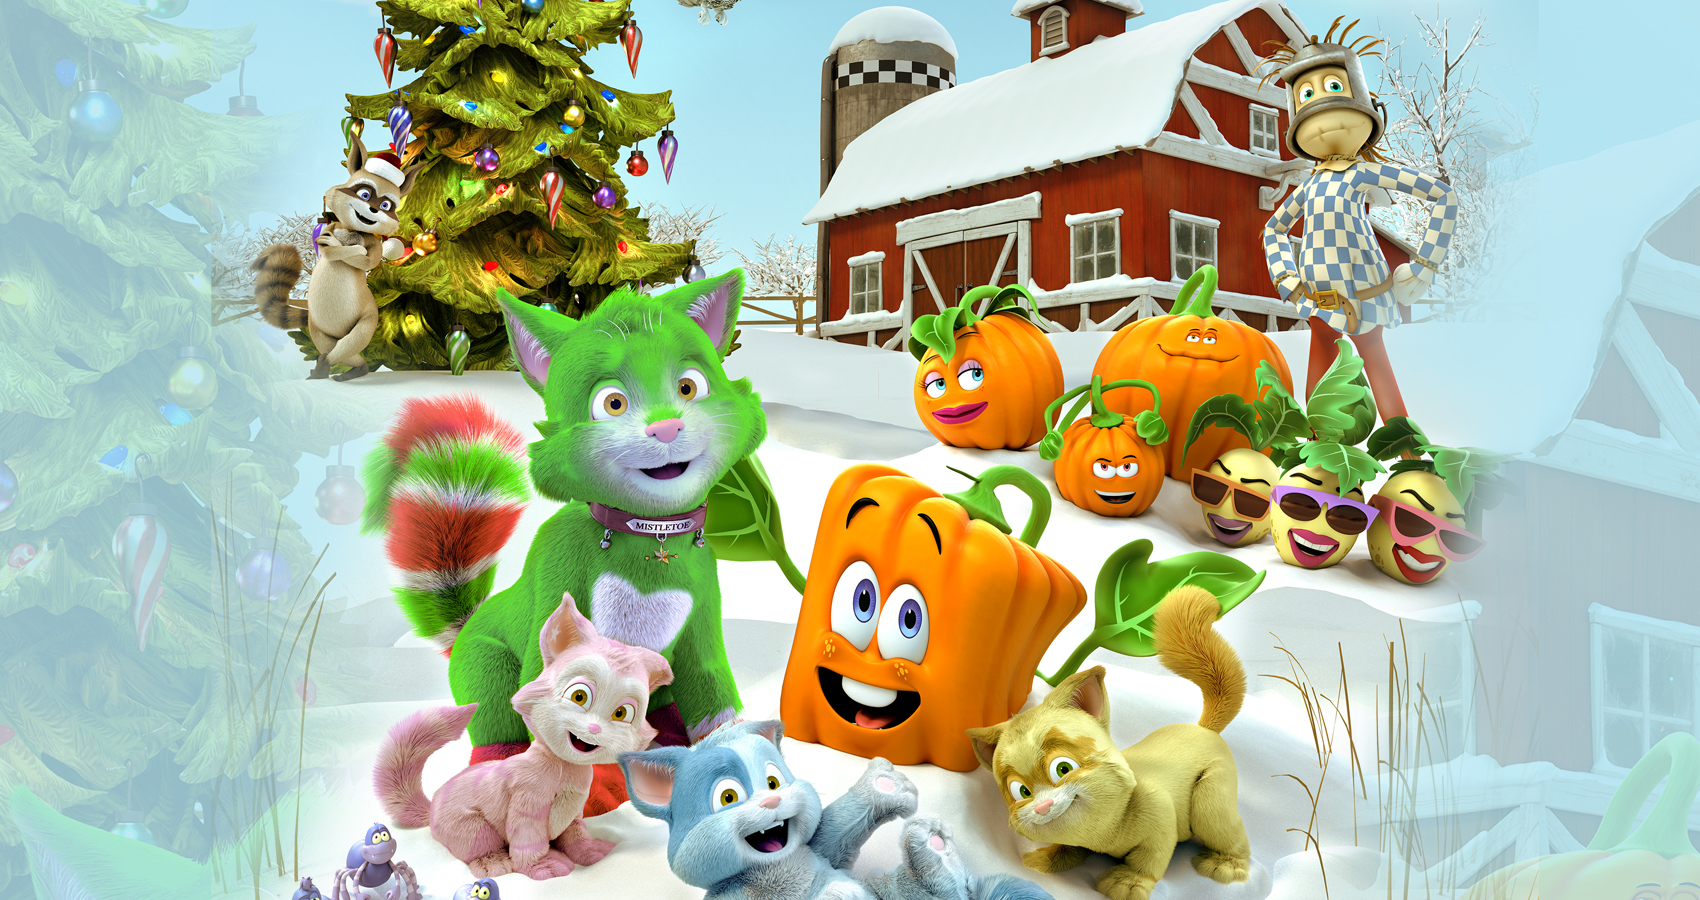 Disney Junior's Spookley the Square Pumpkin Stars in New Animated Christmas Special this December!